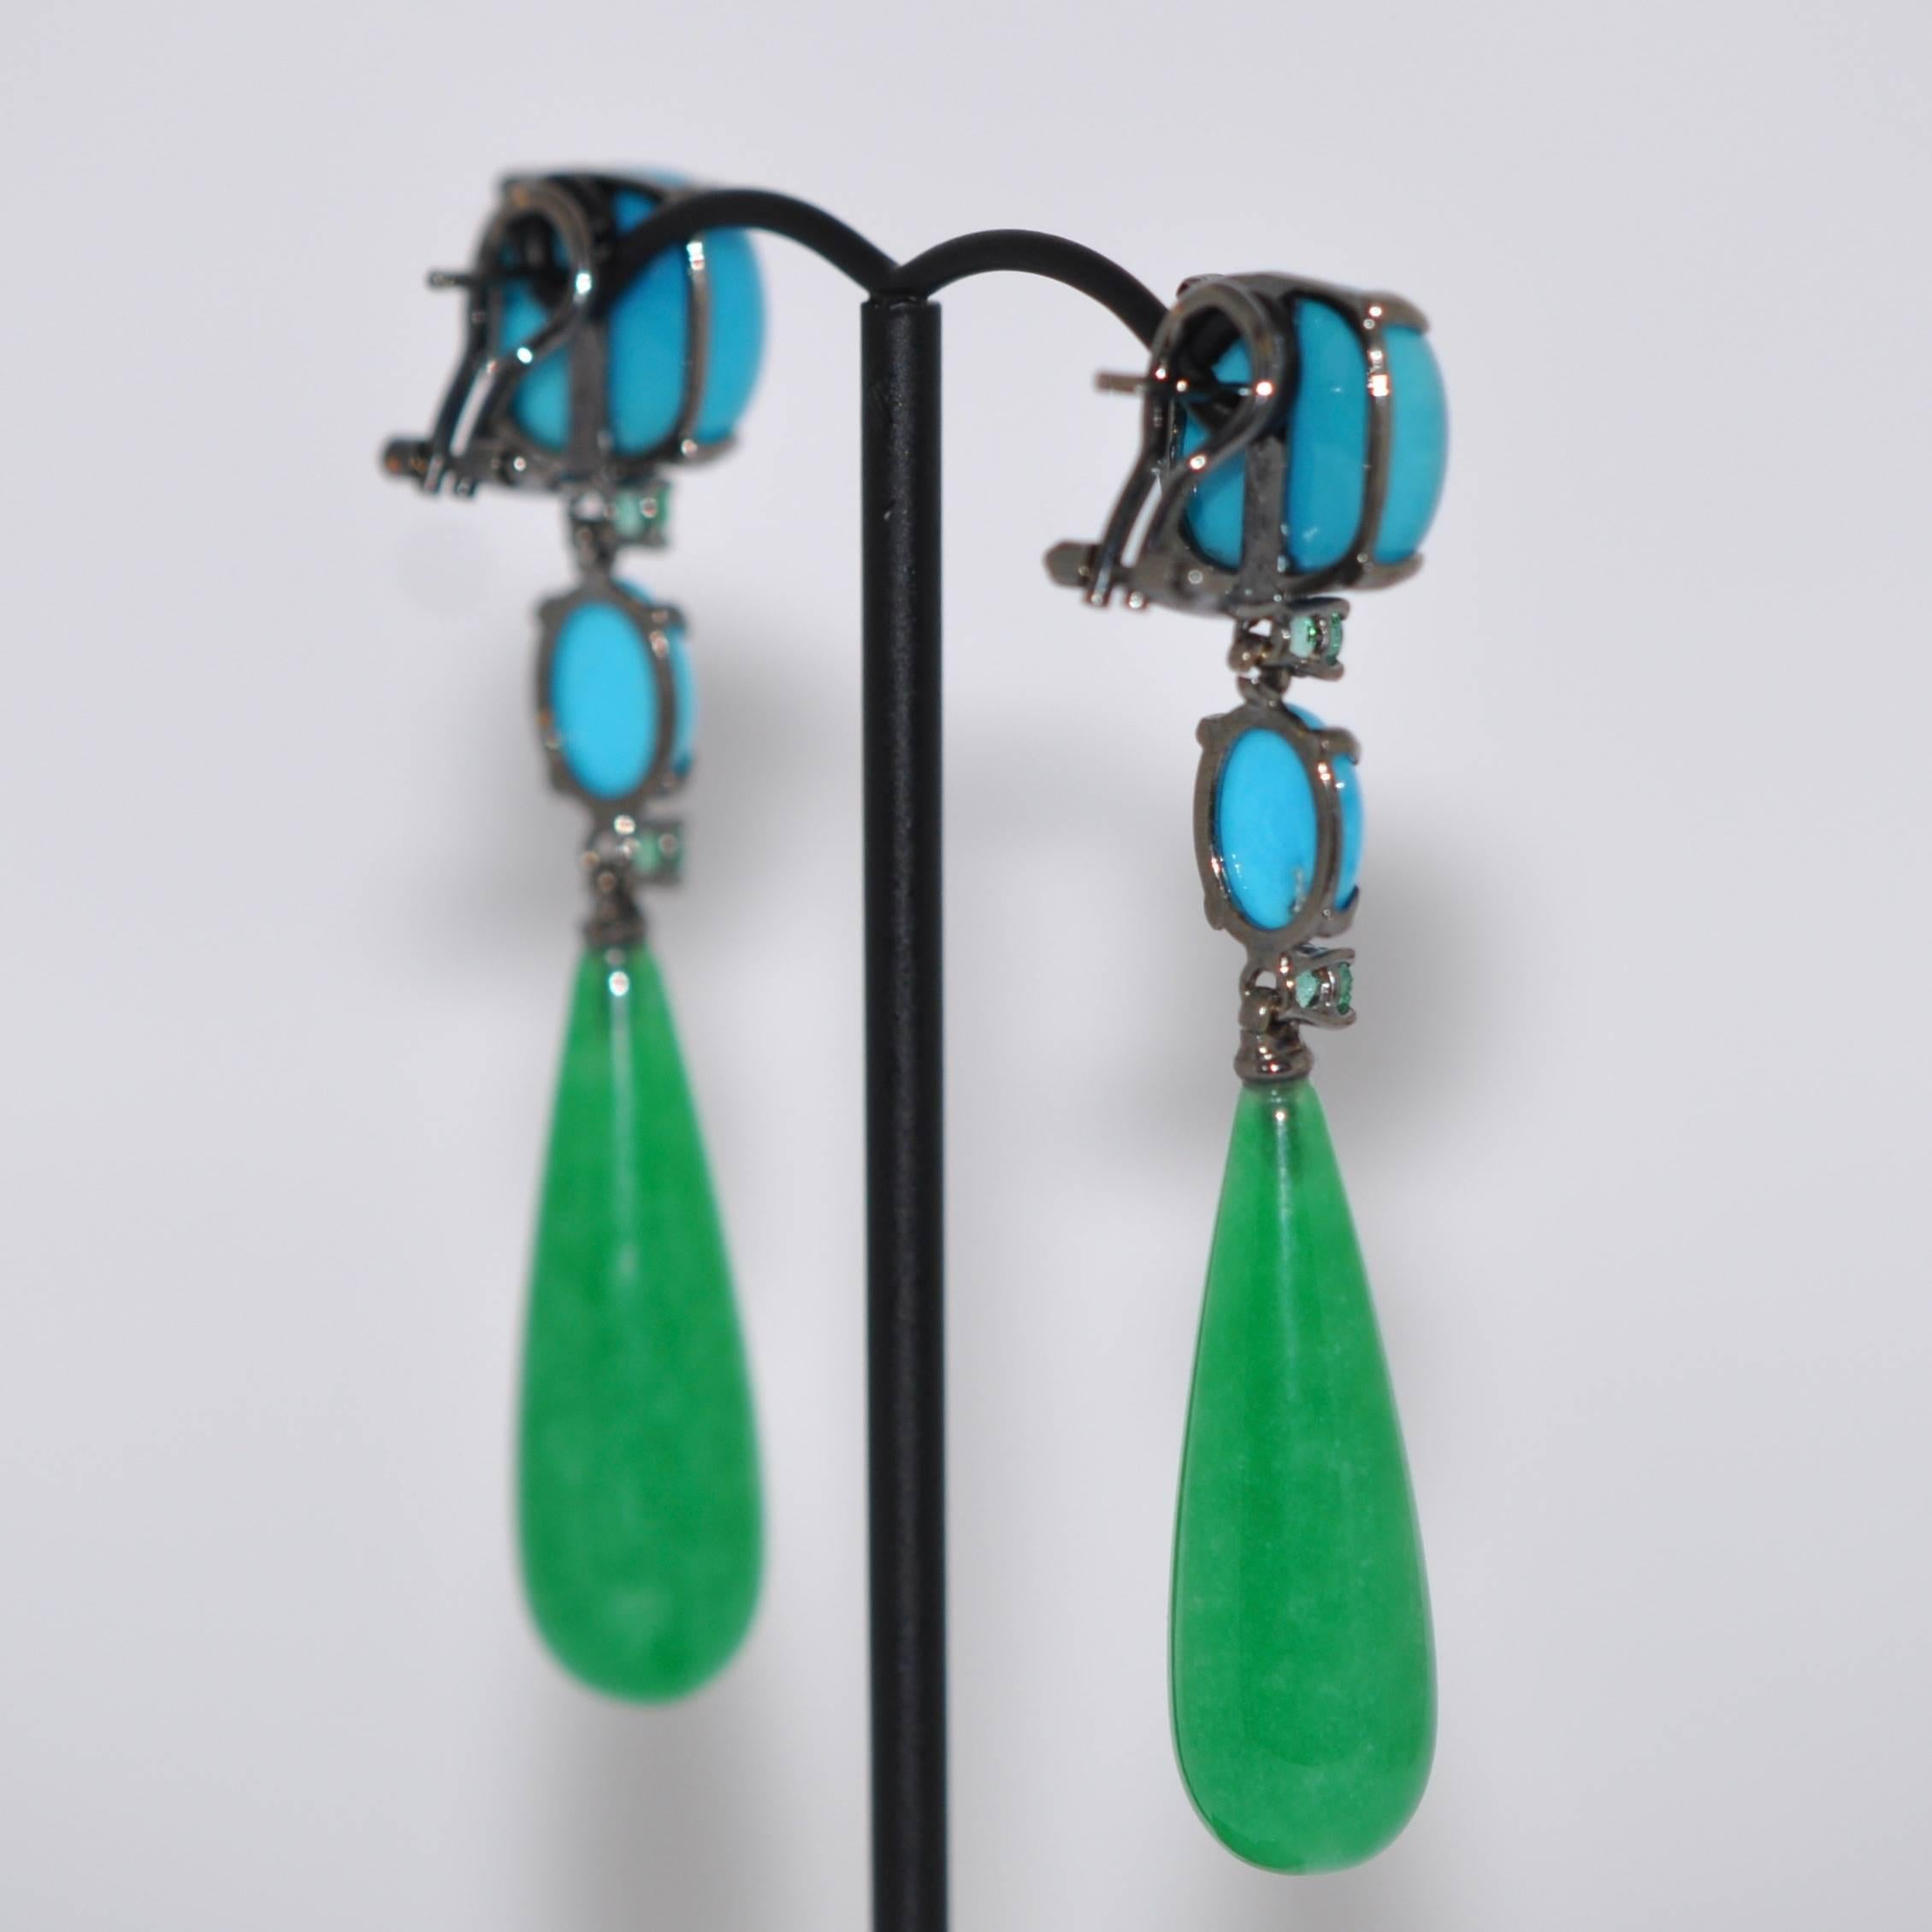 Discover This Jades, Turquoises and Emeralds Black Gold Chandelier Earrings.
Jades
Turquoises 
Emeralds
Black Gold 18 Carat
